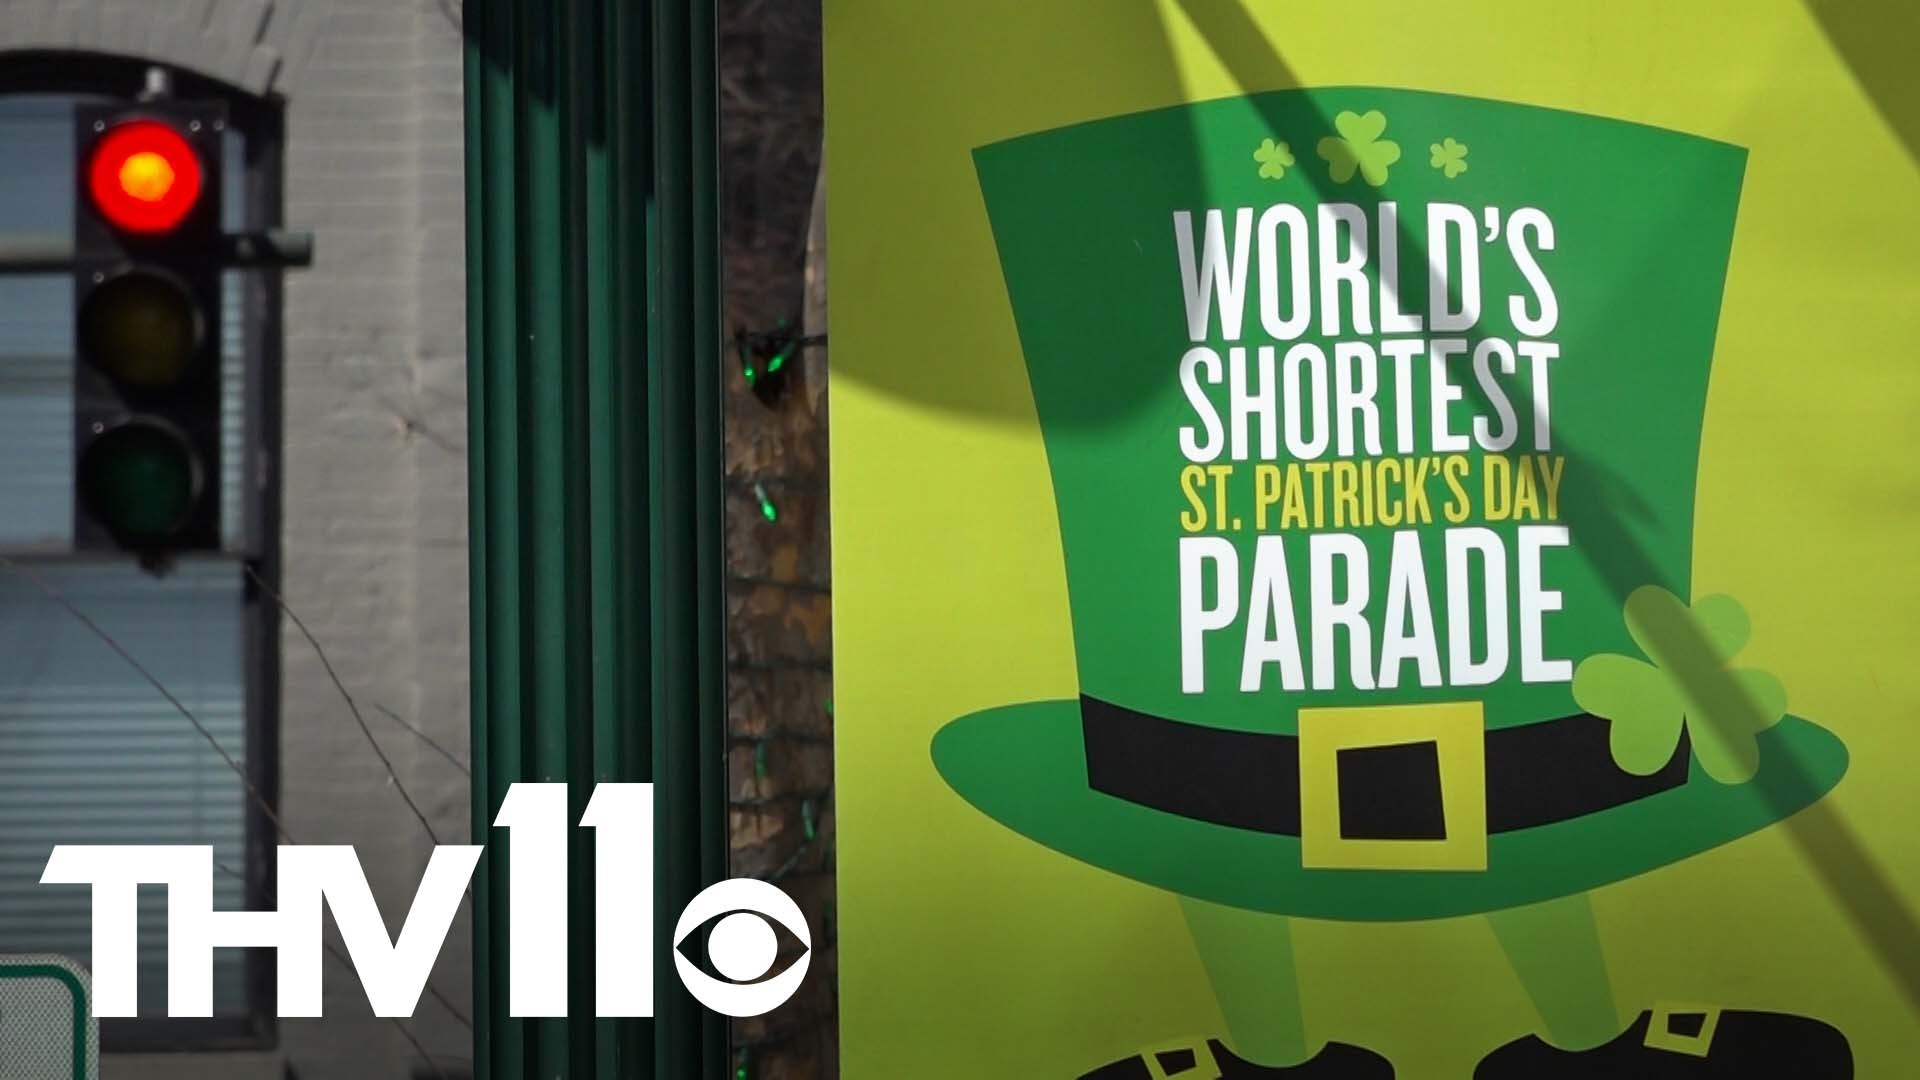 Thousands of people arrived for the return of the World's Shortest St. Patrick Parade and many in Hot Springs are excited to see it return.